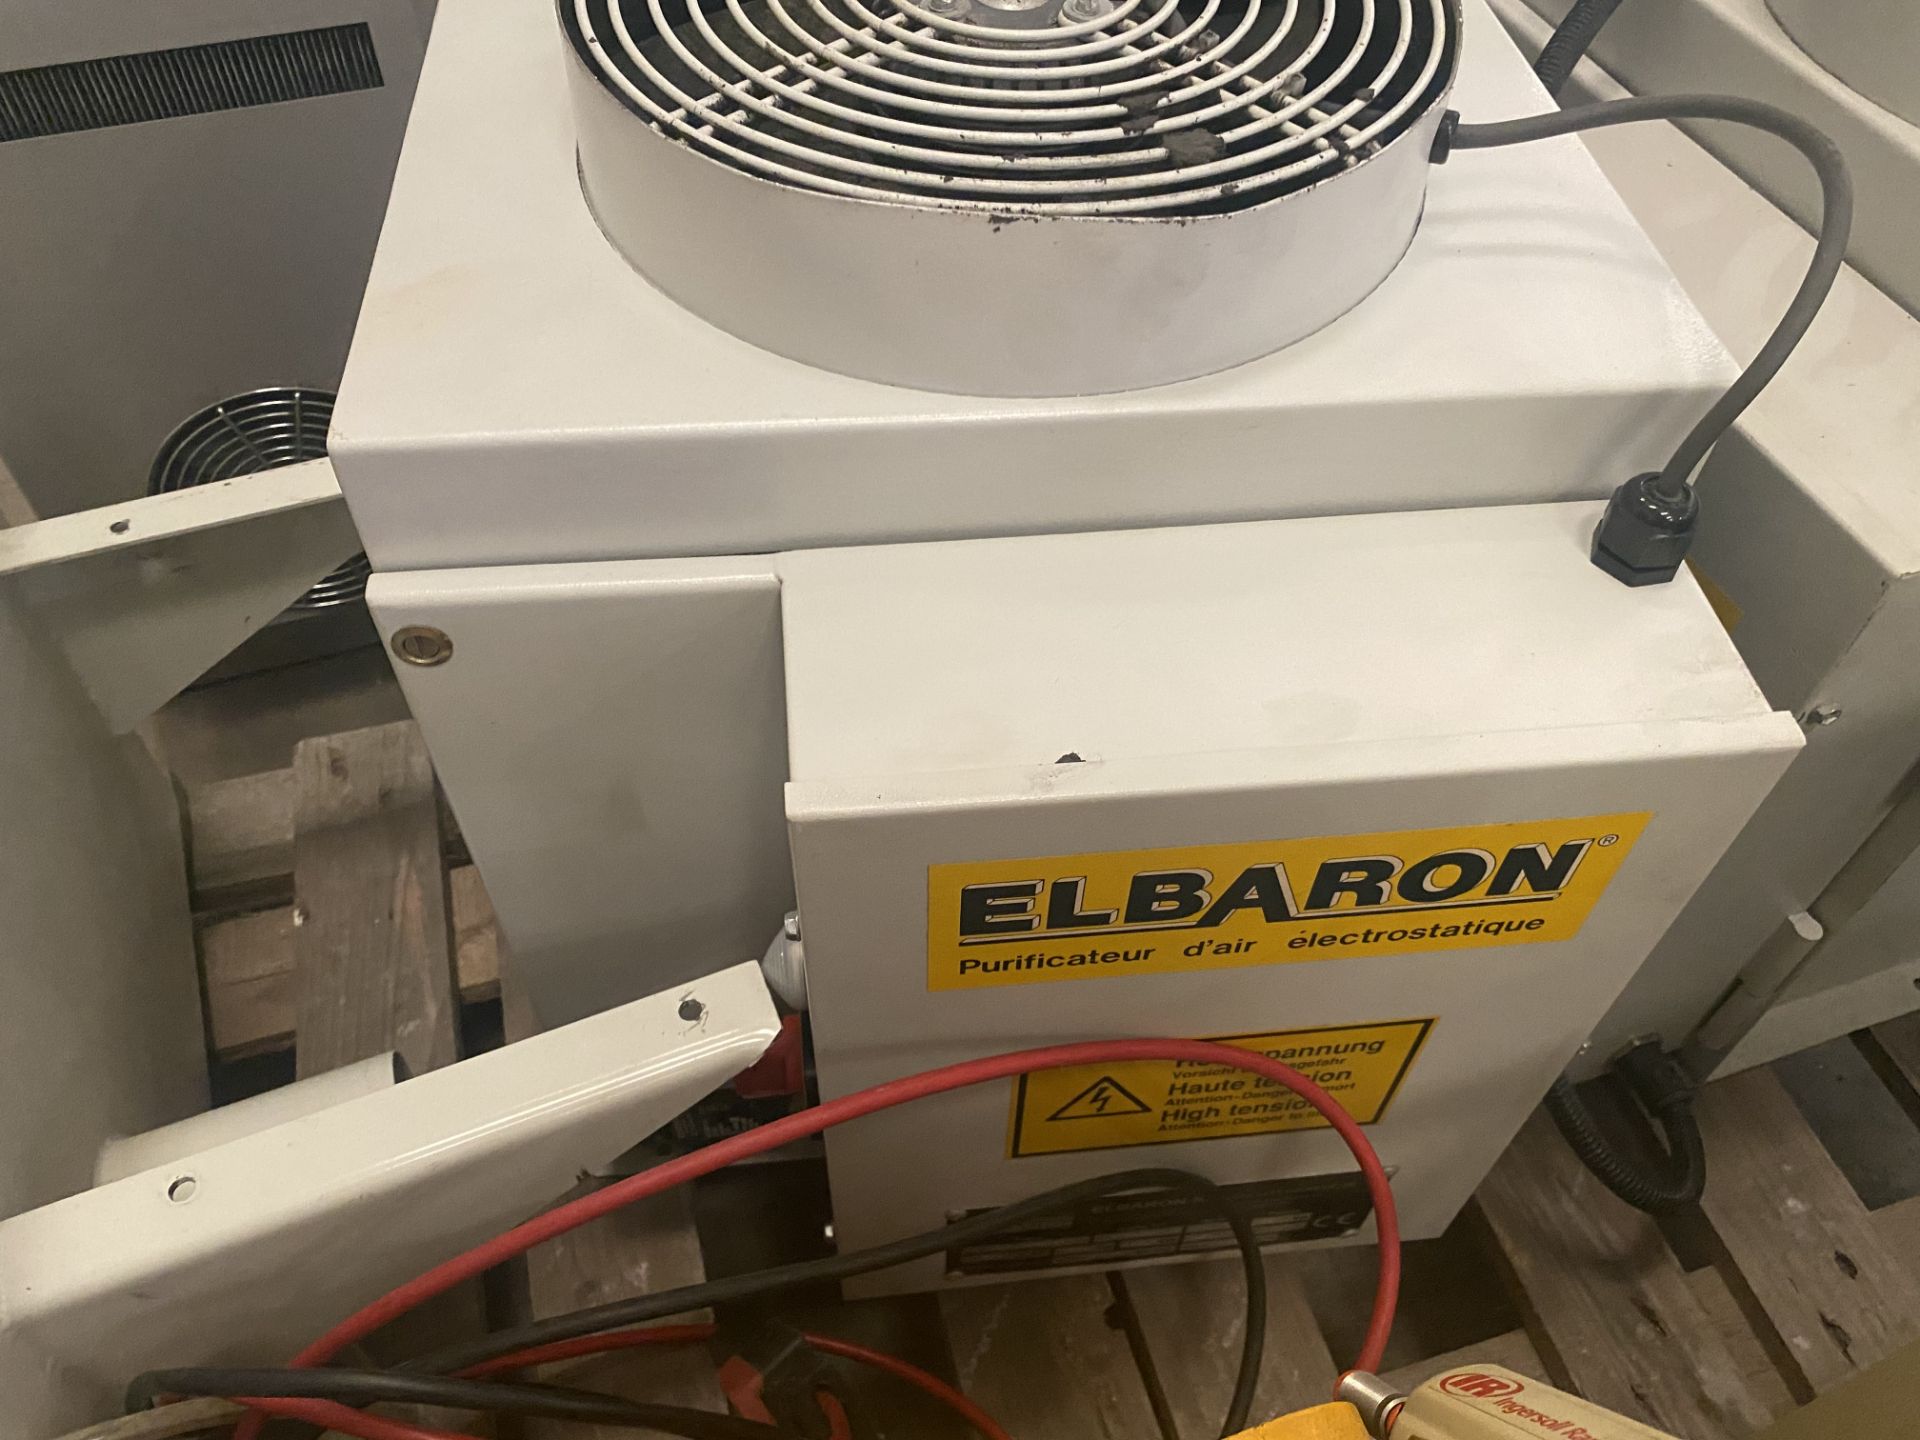 Elbaron RON/A 60 SV Electrostatic Air Purifier, free loading onto purchasers transport - Yes, item